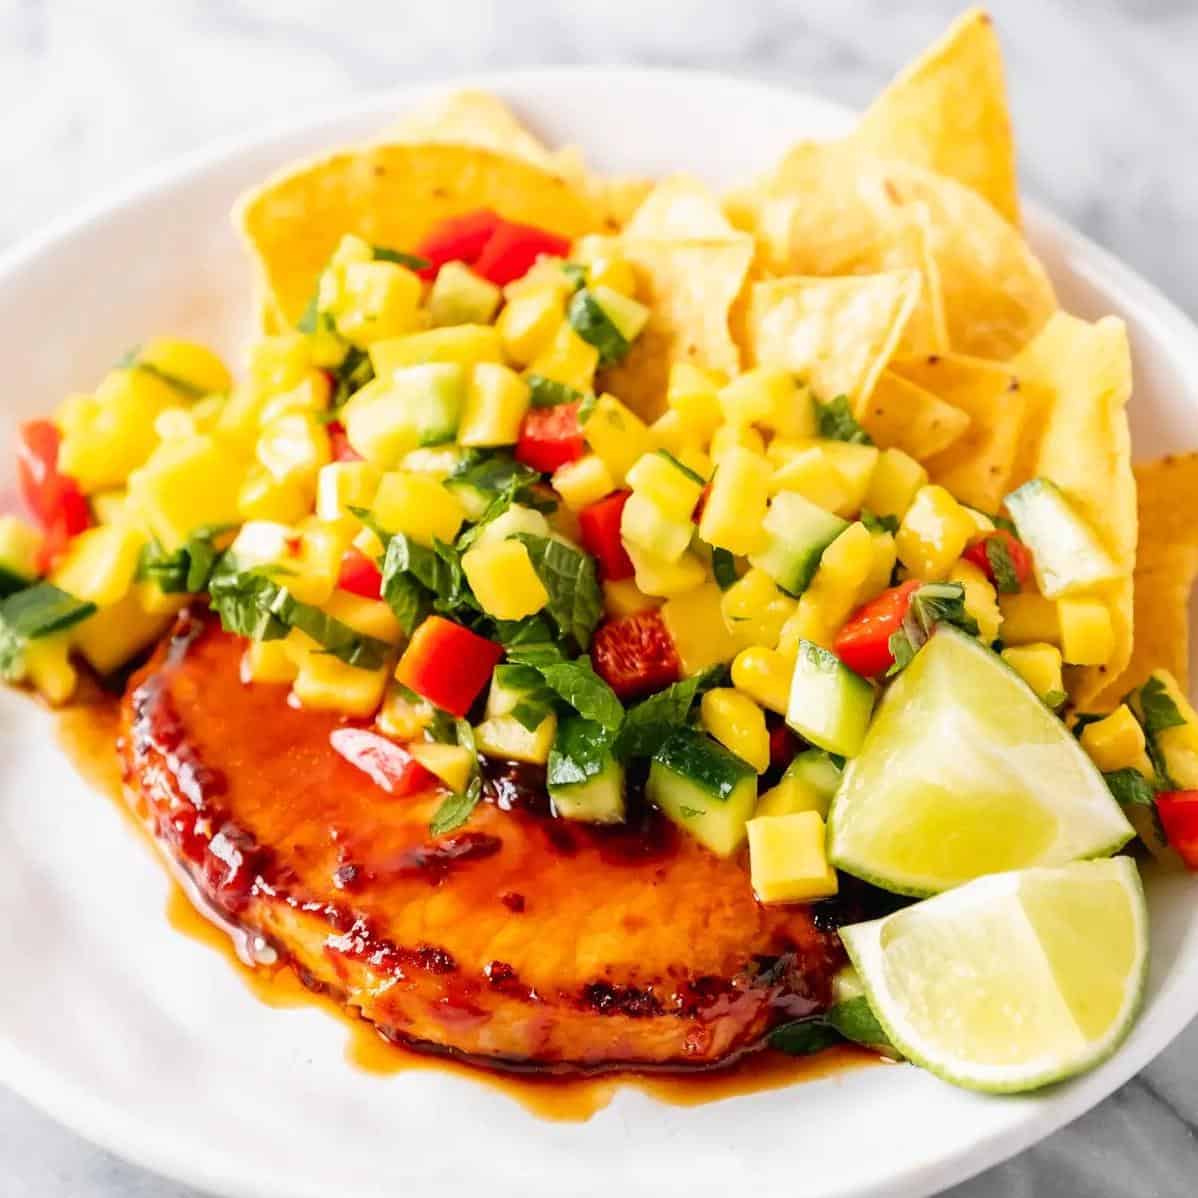  Pork lovers rejoice! Try this incredible combination of pork medallions with juicy mango slices for a delightful